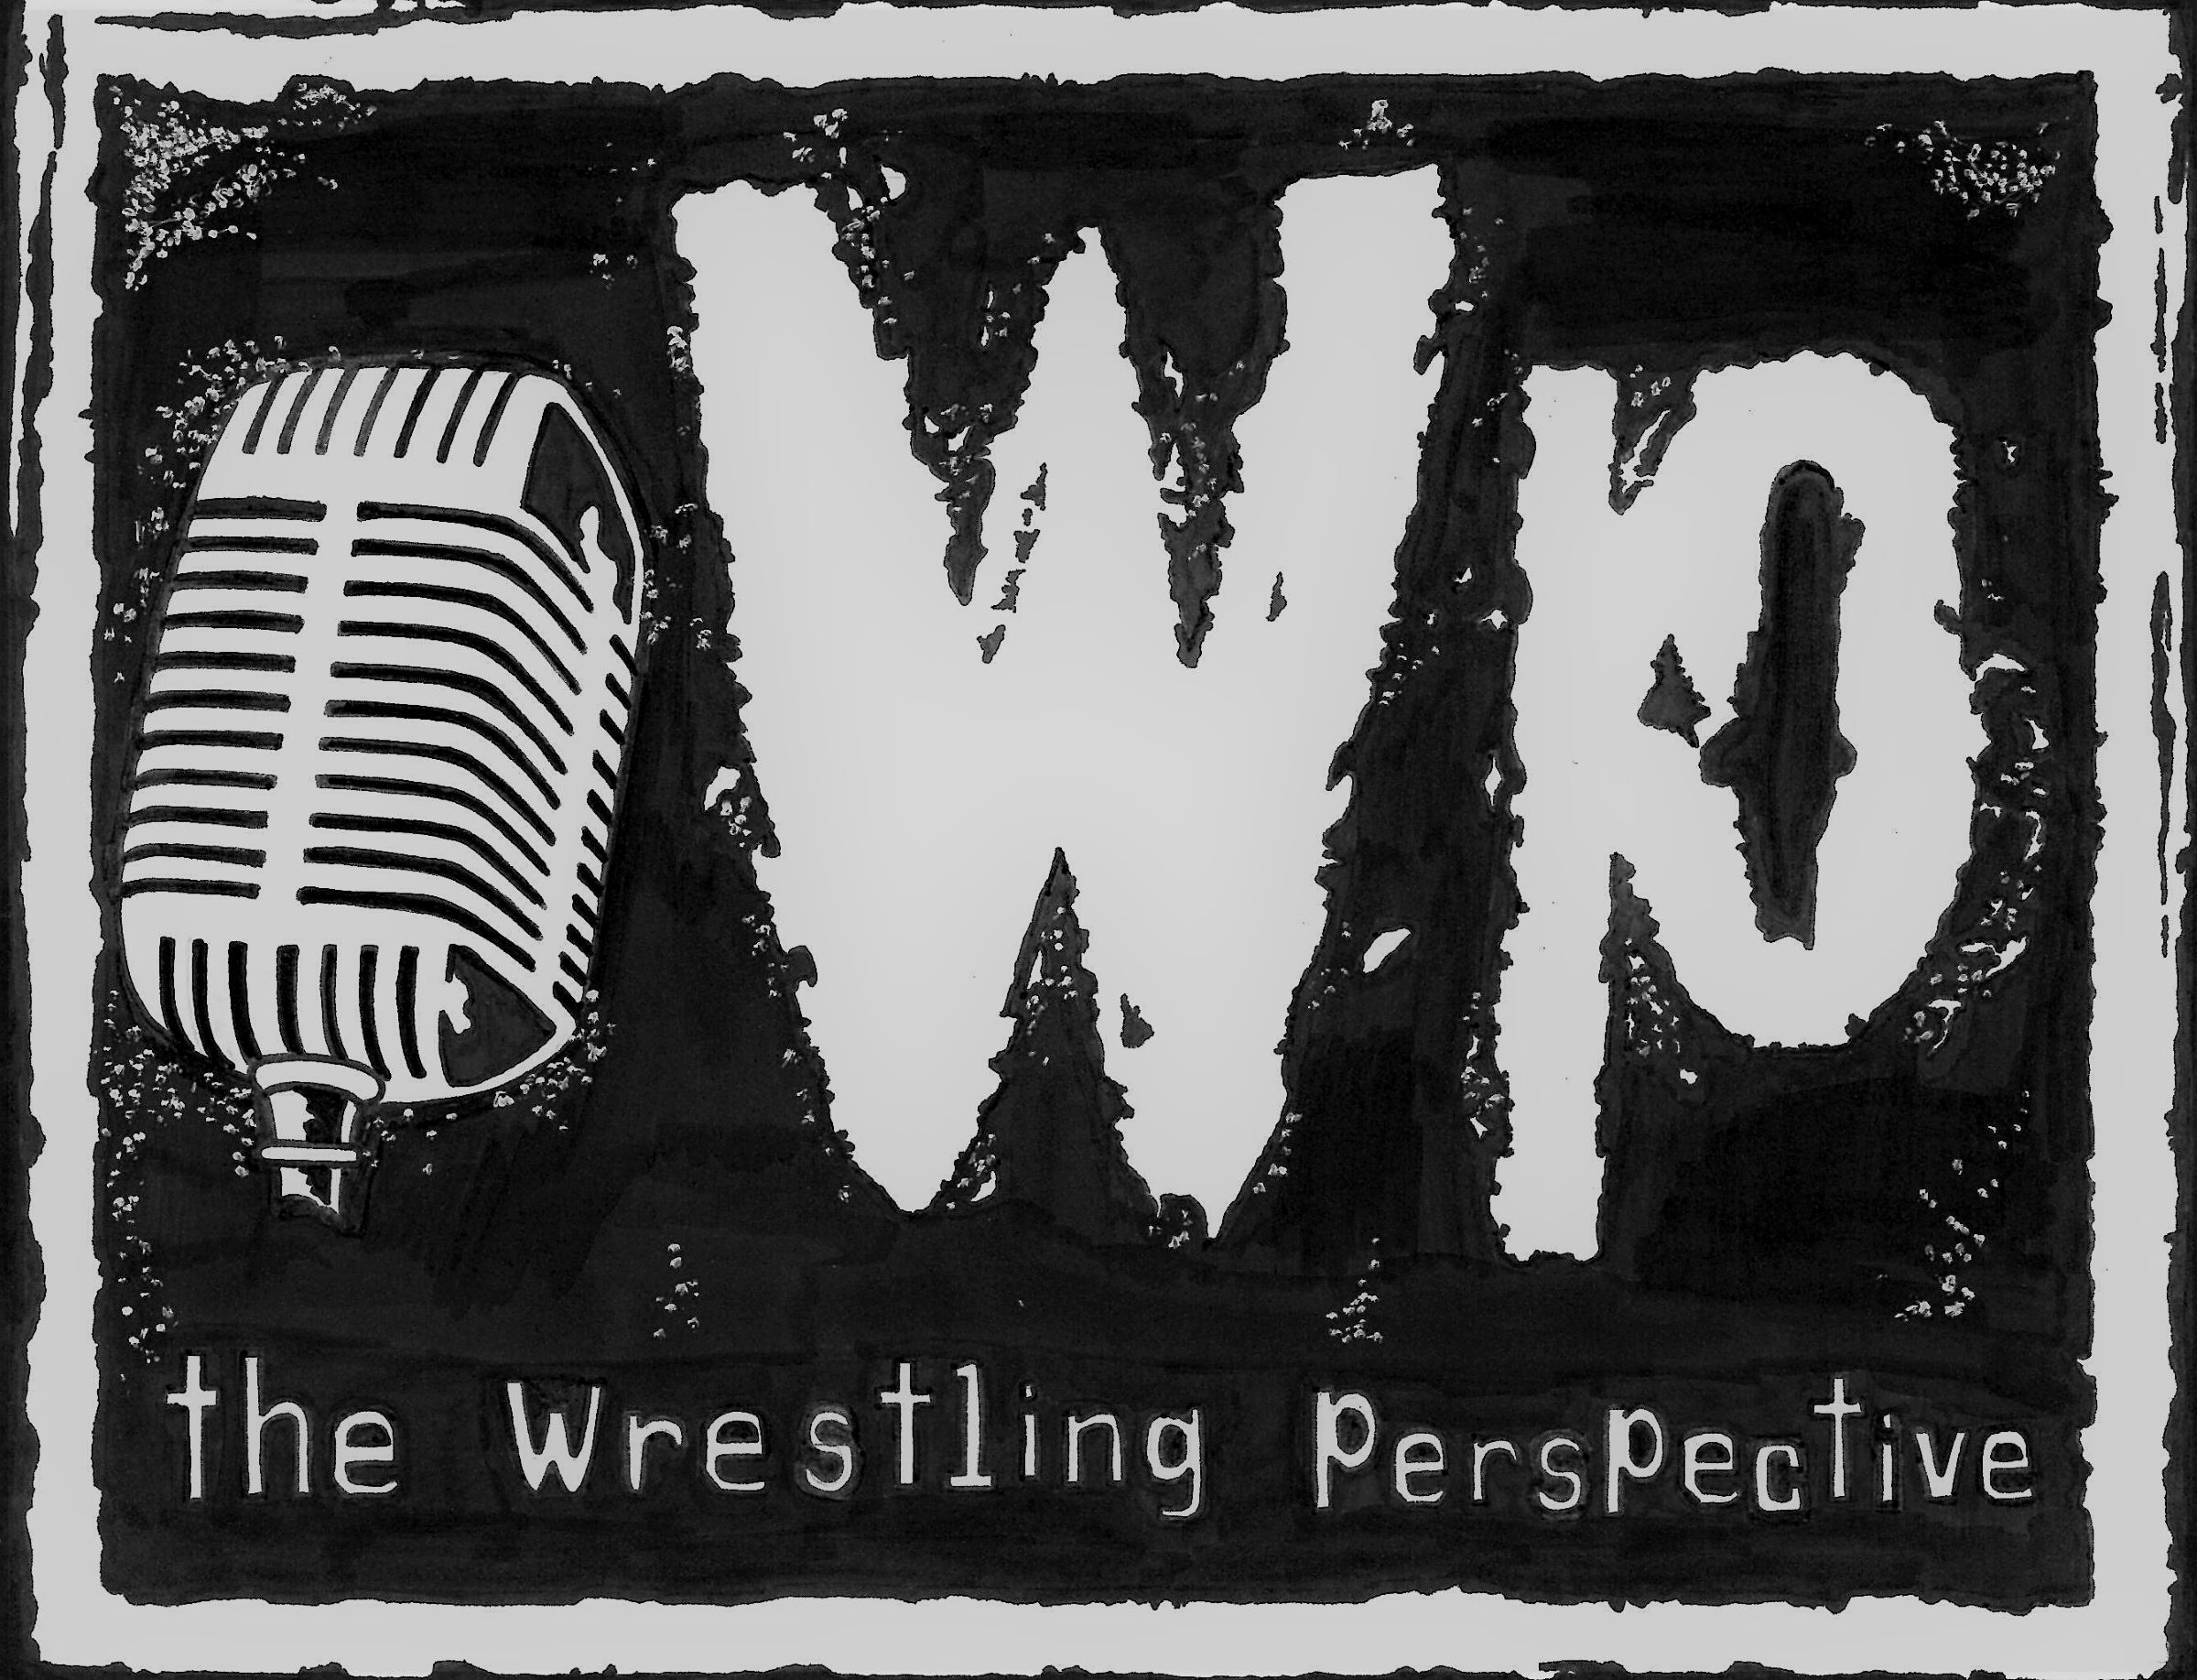 Time to announce the new host of the Wrestling Perspective